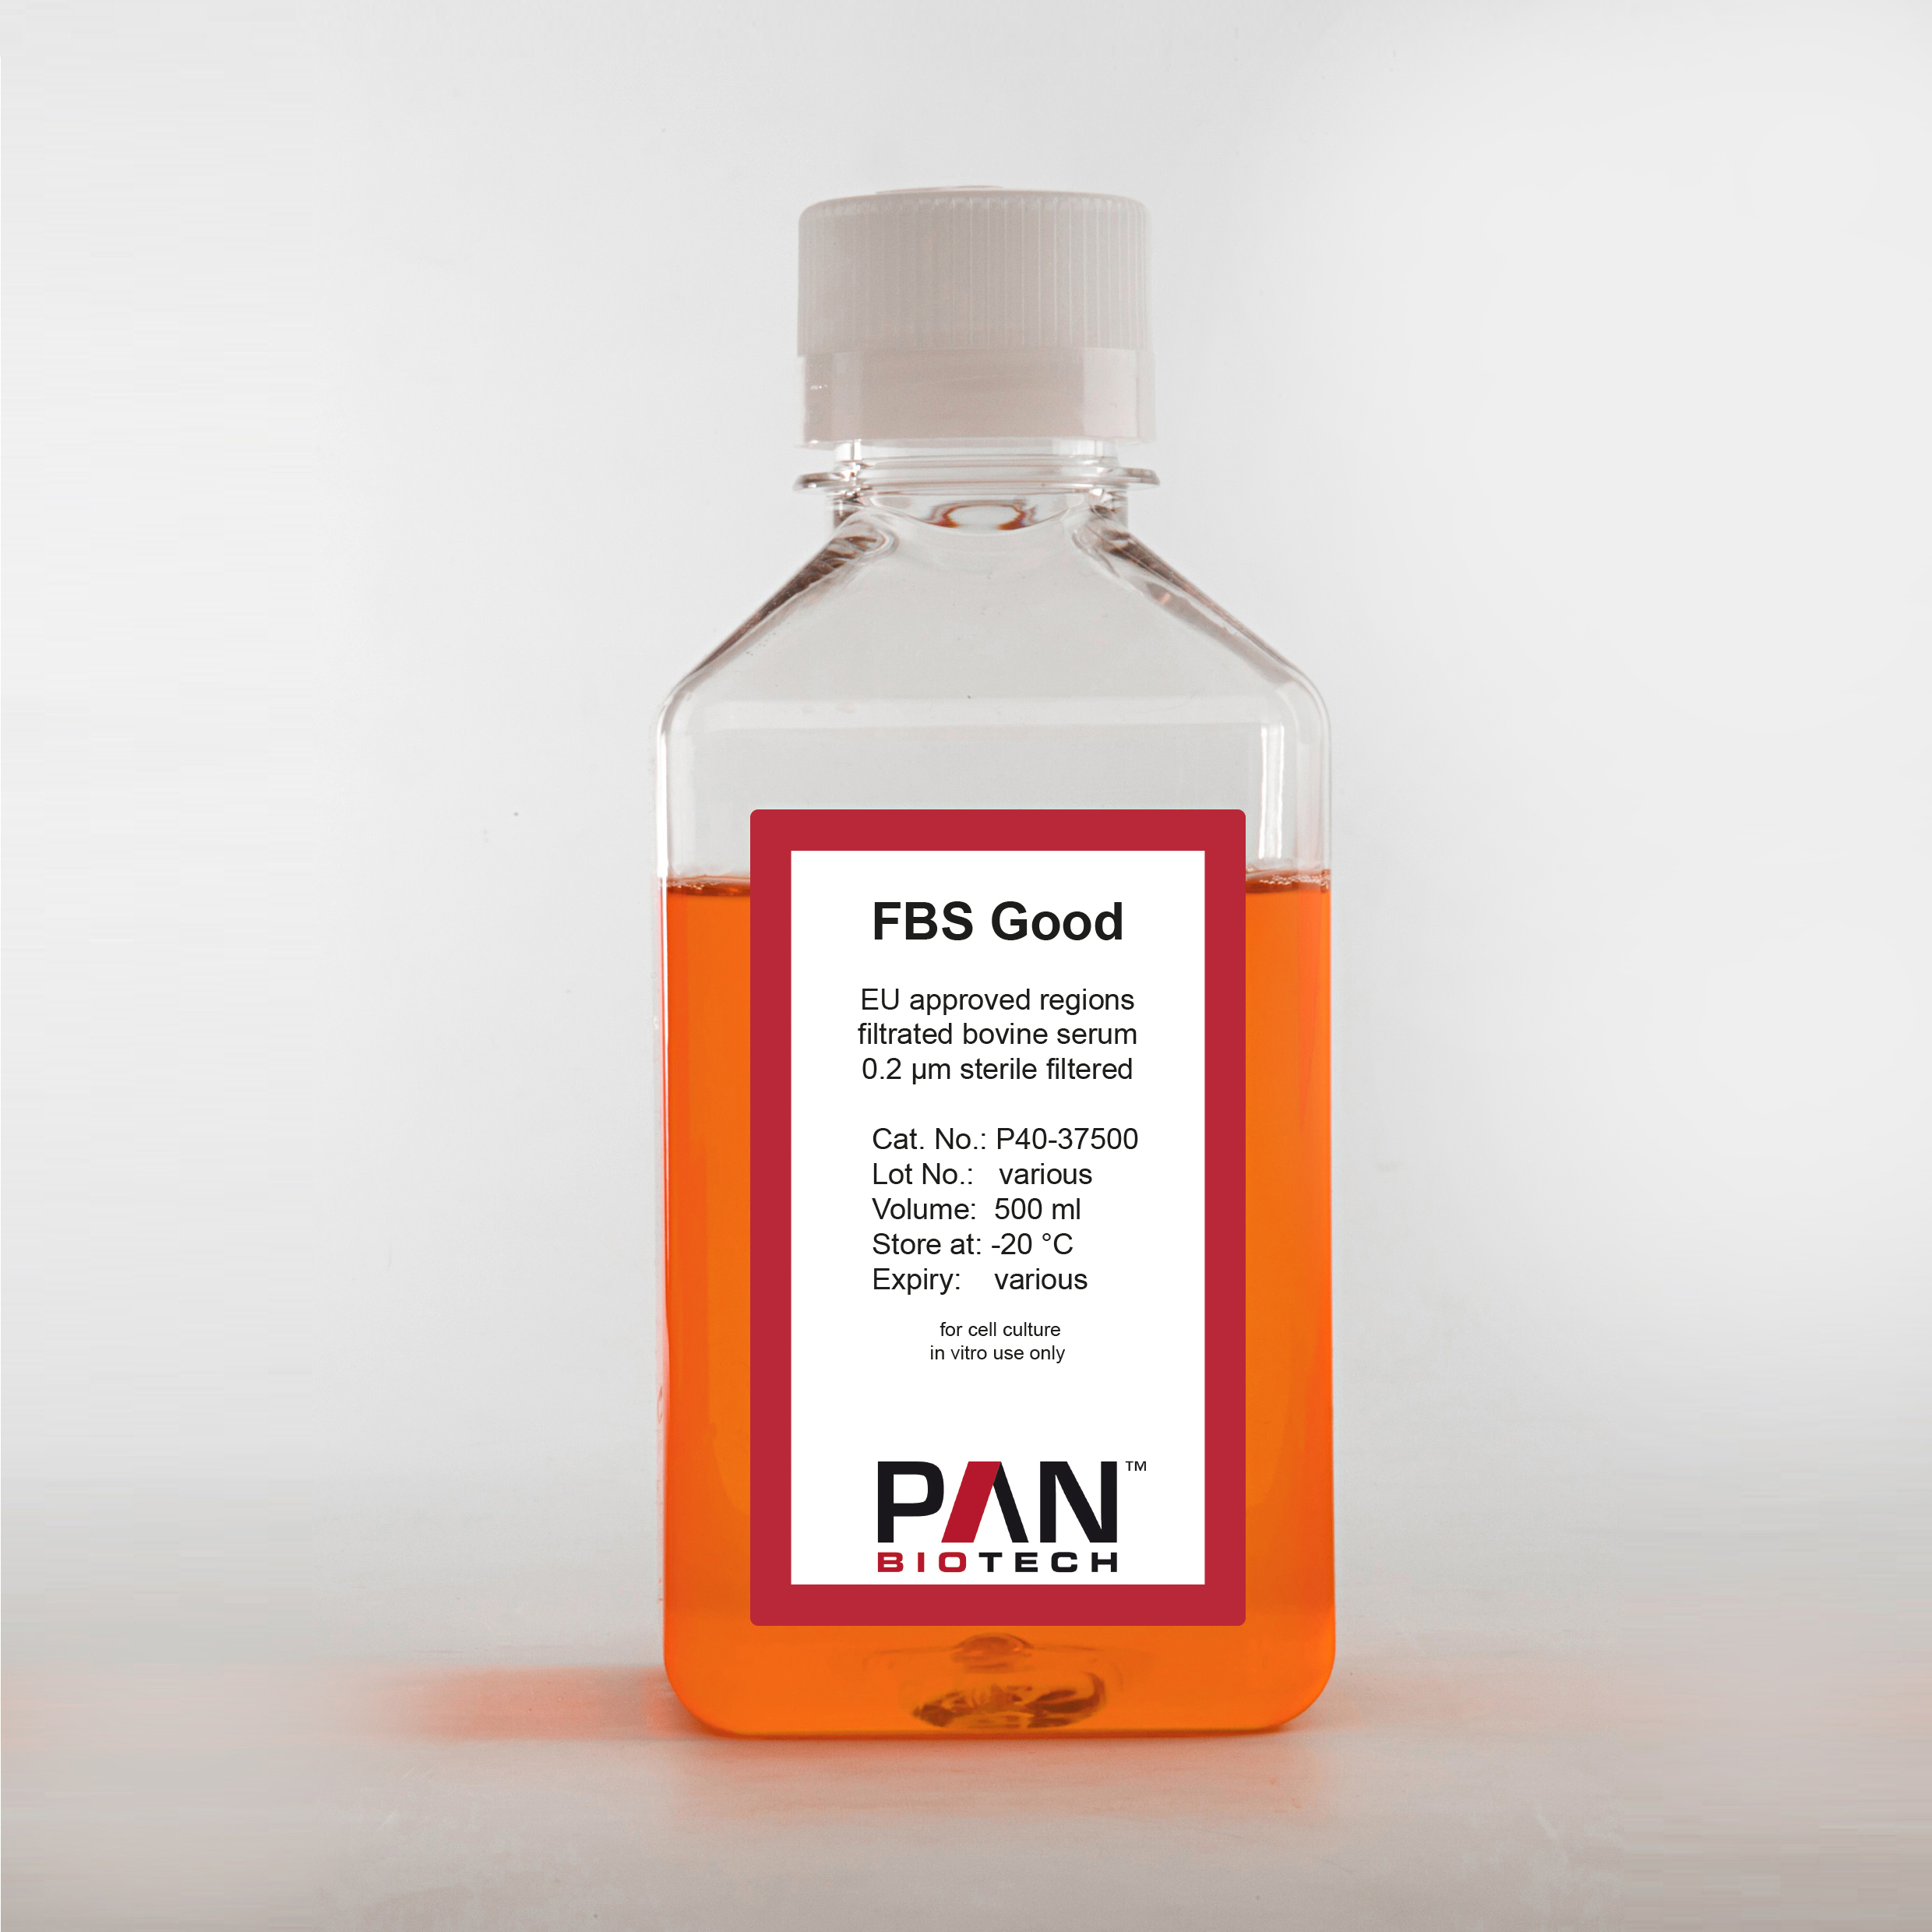 FBS Good, EU approved regions, filtrated bovine serum, 0.2 µm sterile filtered